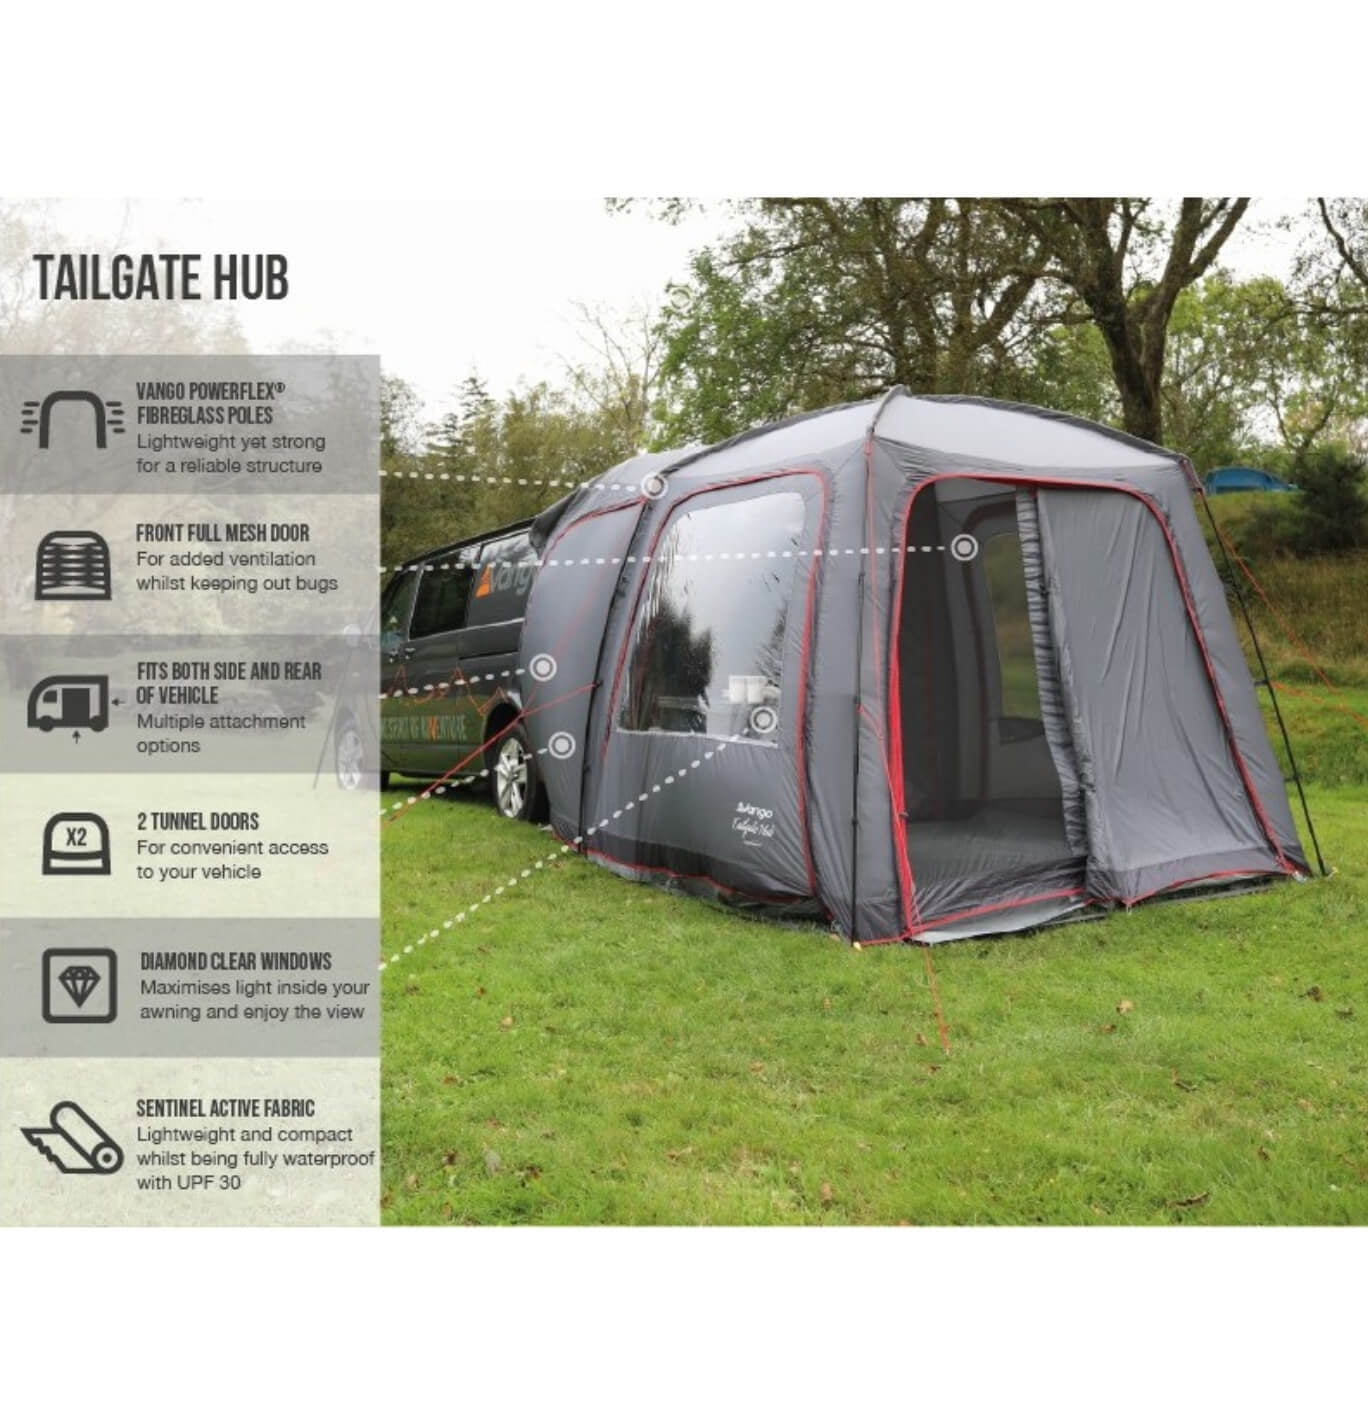 Features of the tailgate hub